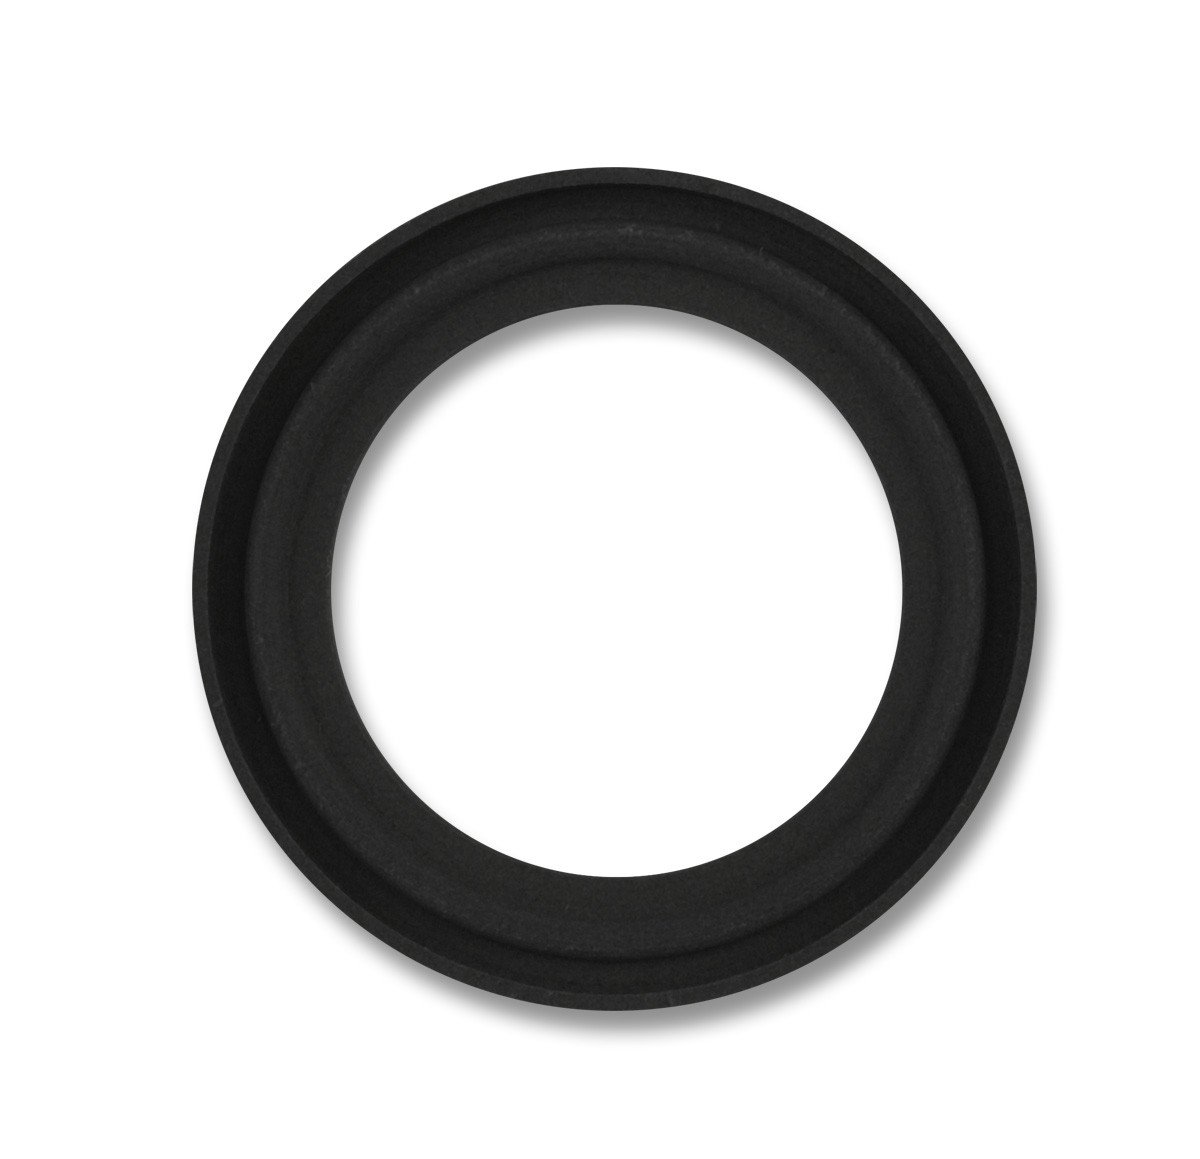 Rubber Fab BUNA Tri-Clamp Style Gaskets - Type II Flanged Shop All Categories Rubber Fab 1-inch Black 